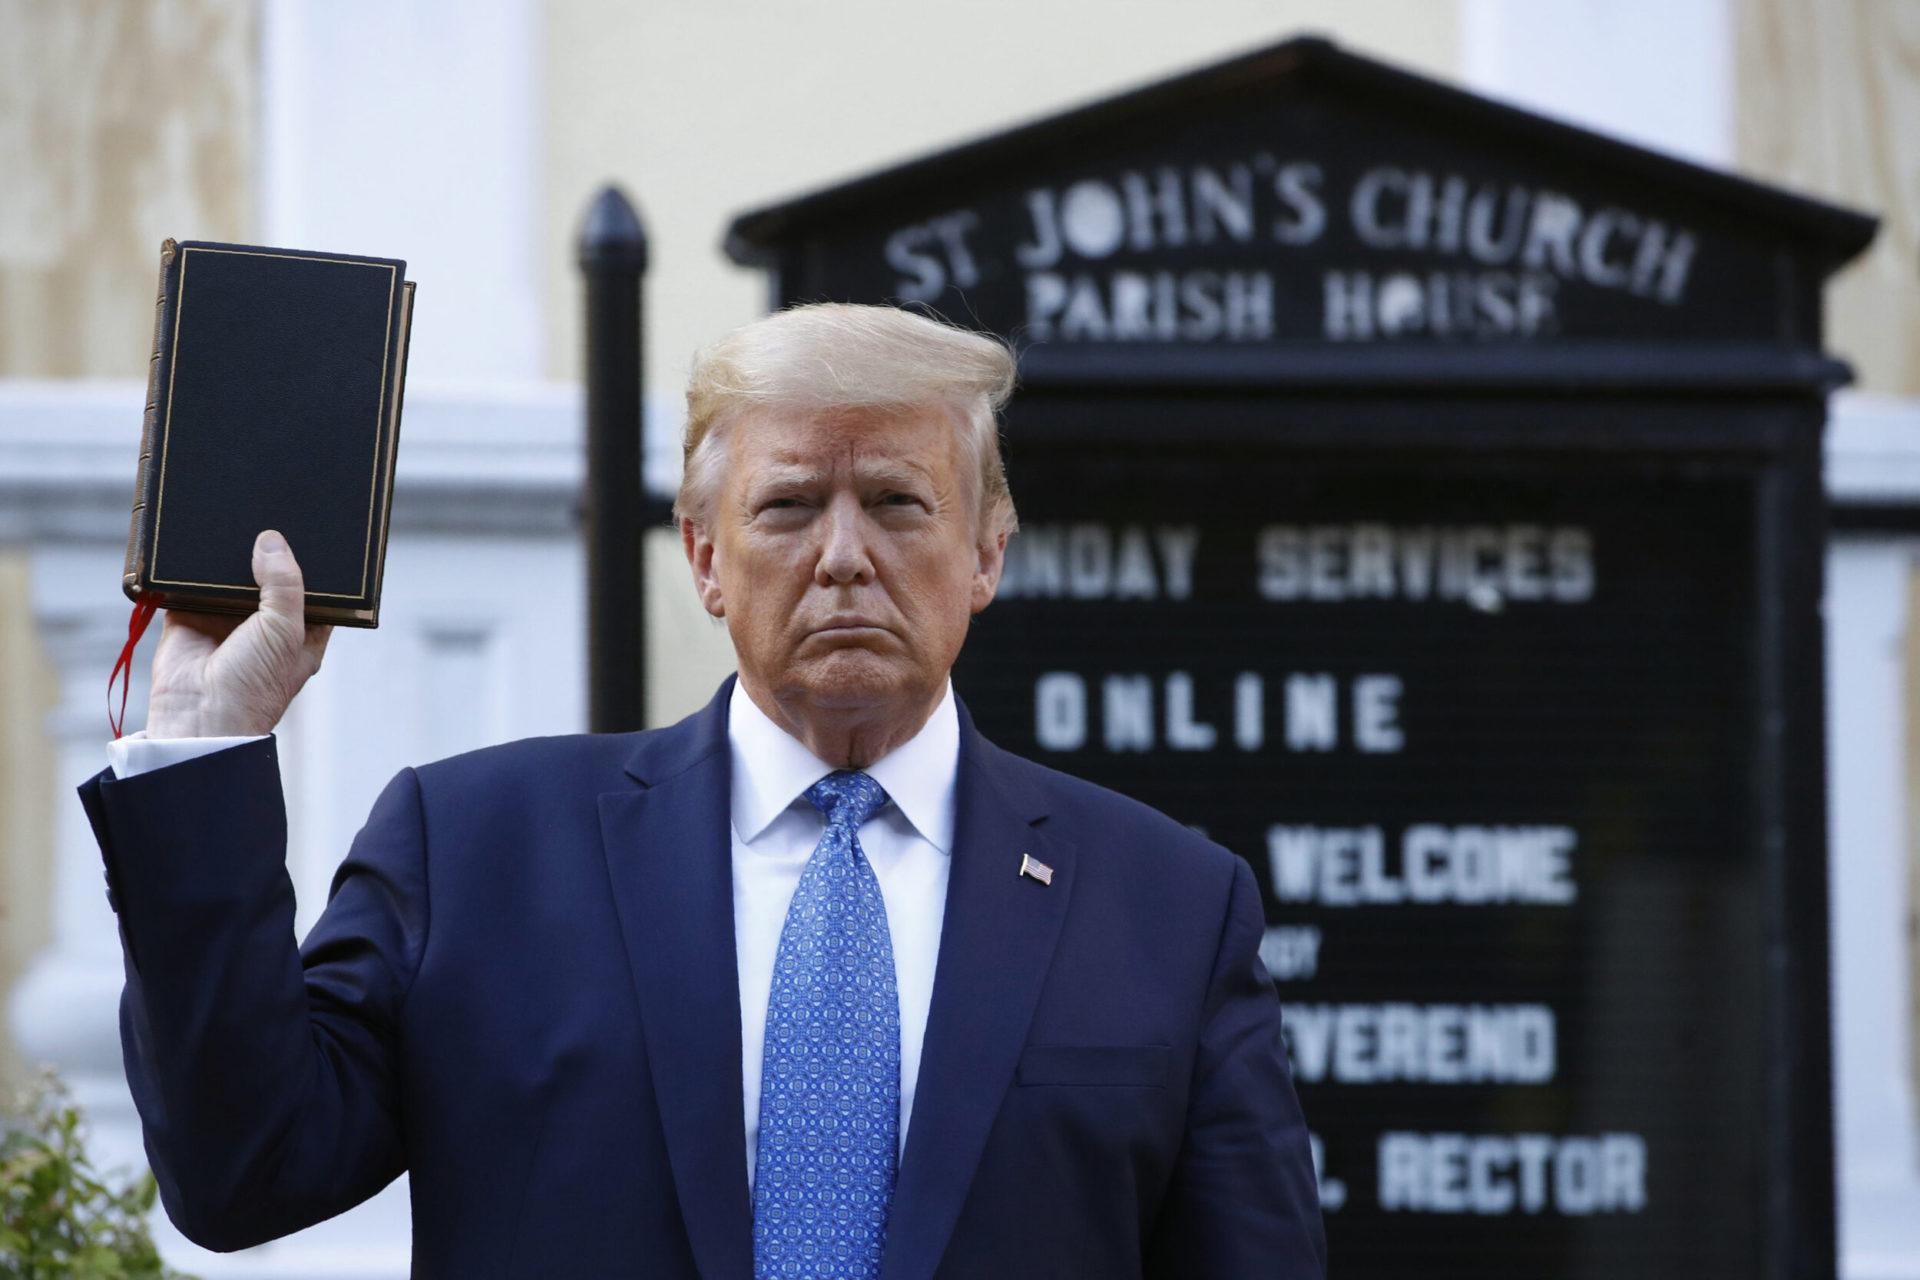 Donald Trump’s high profile visit to St John’s Church in June, 2020, which prompted widespread condemnation (Patrick Semansky, Associated Press)